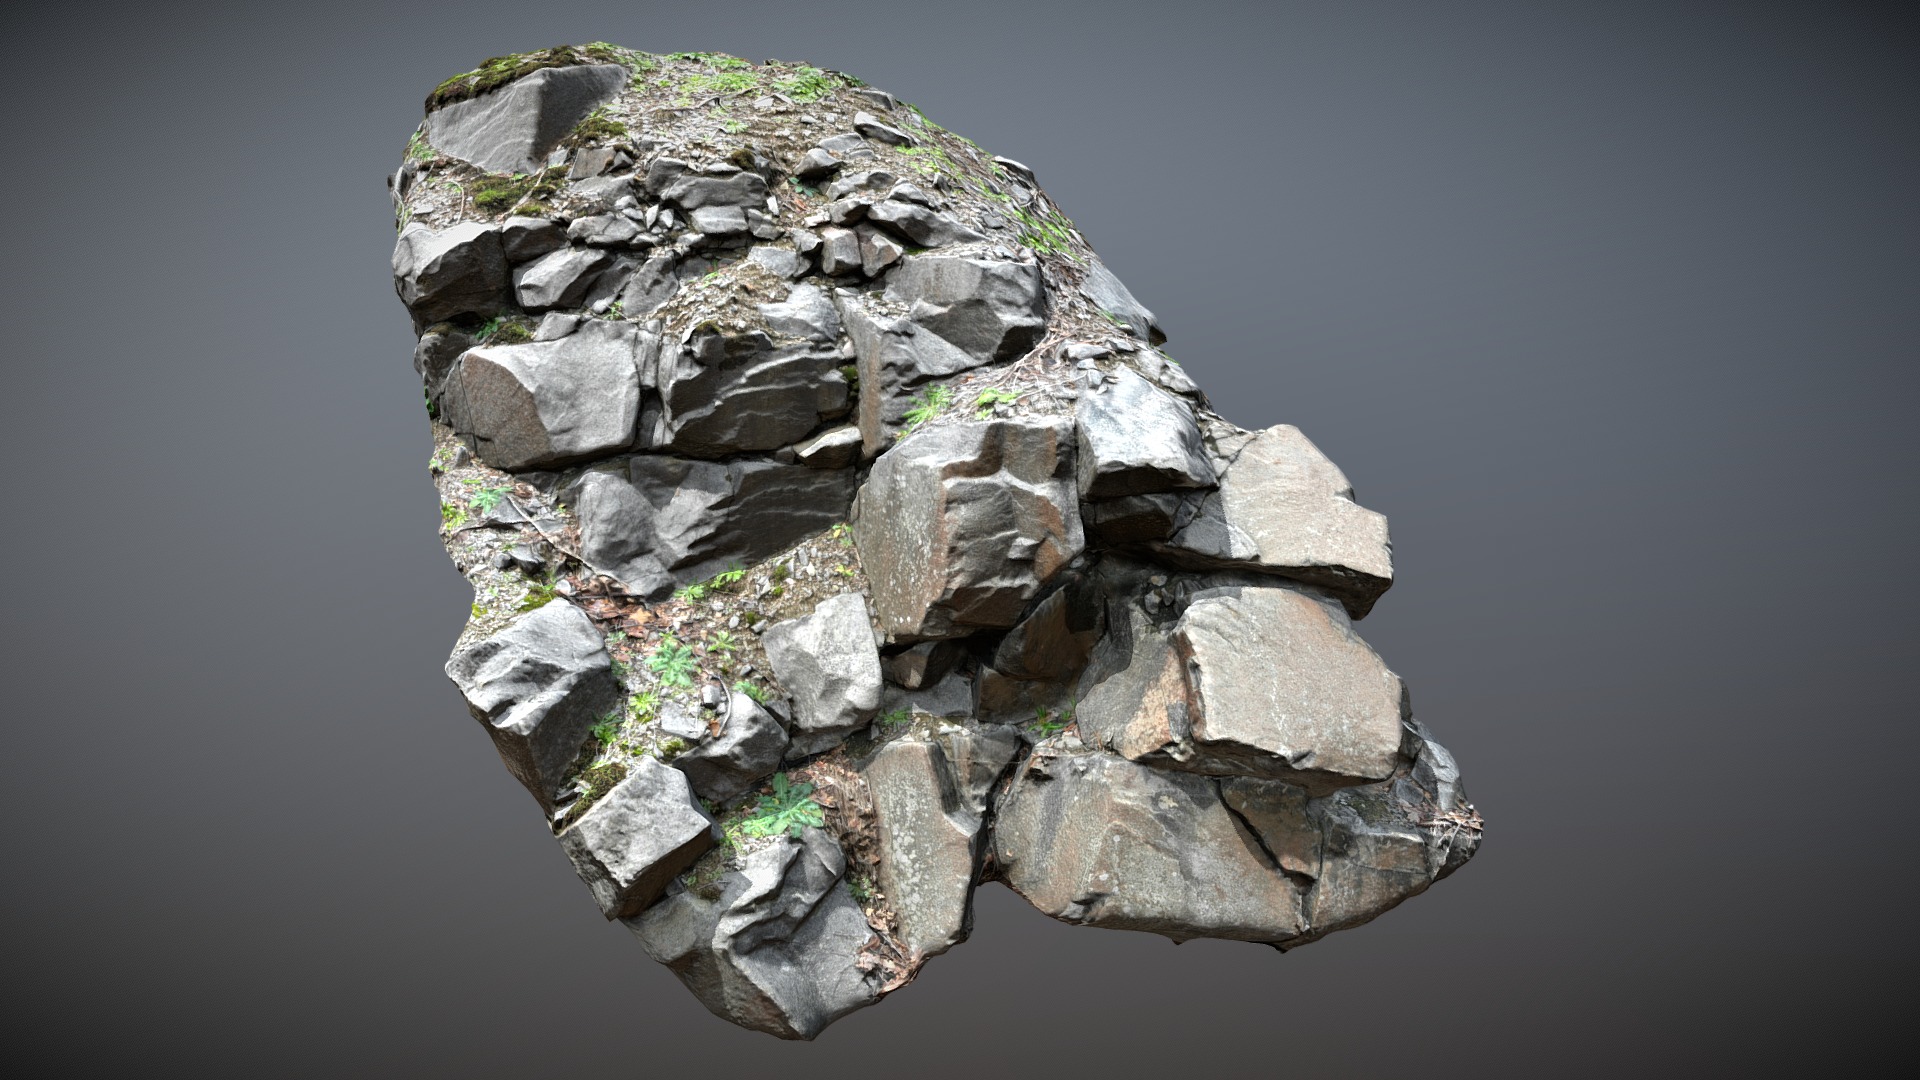 3D model 3d scanned cliff face L - This is a 3D model of the 3d scanned cliff face L. The 3D model is about a pile of rocks.